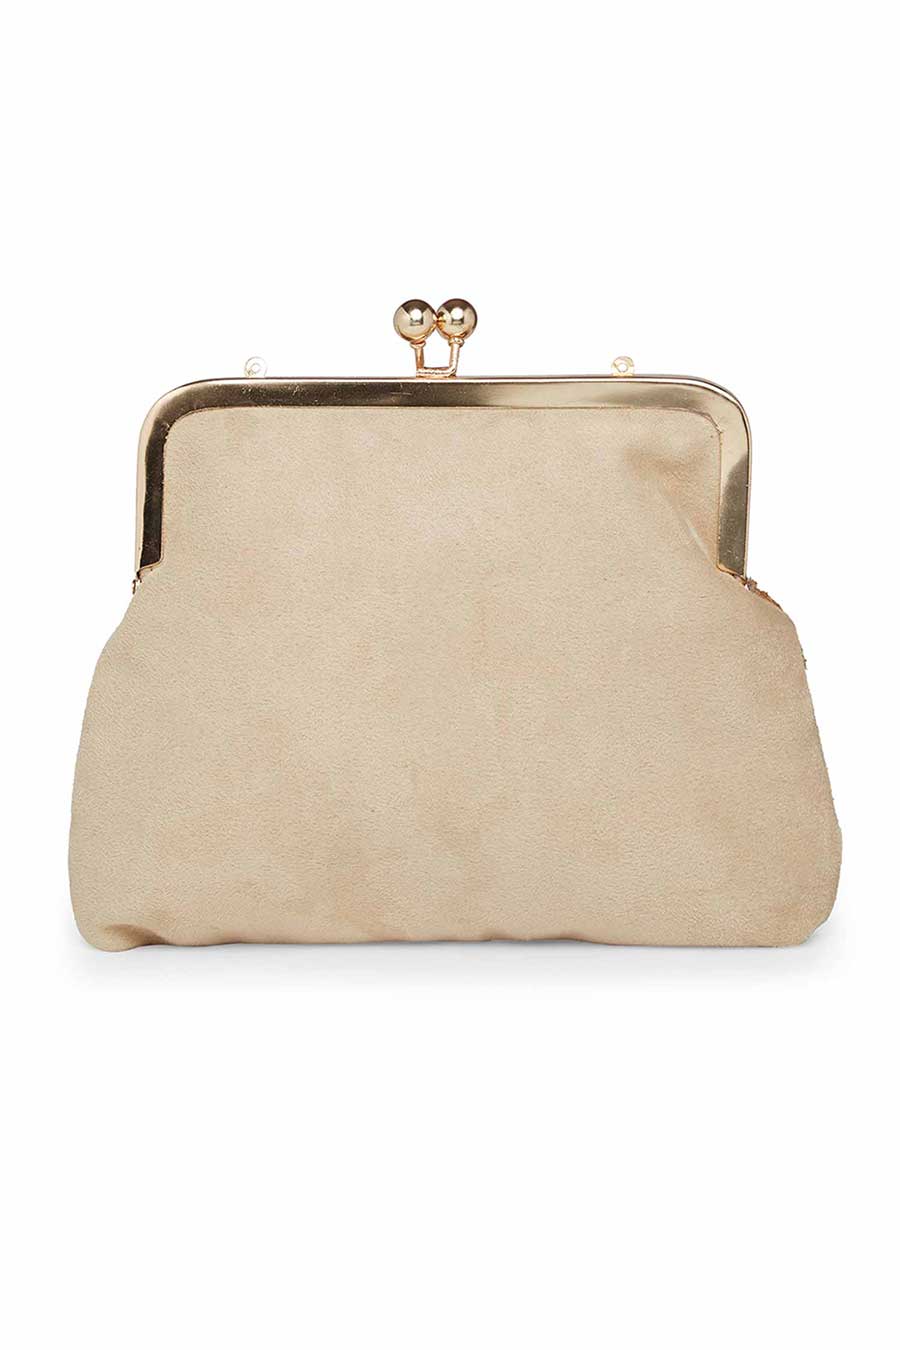 Beige Embroidered Pouch Clutch